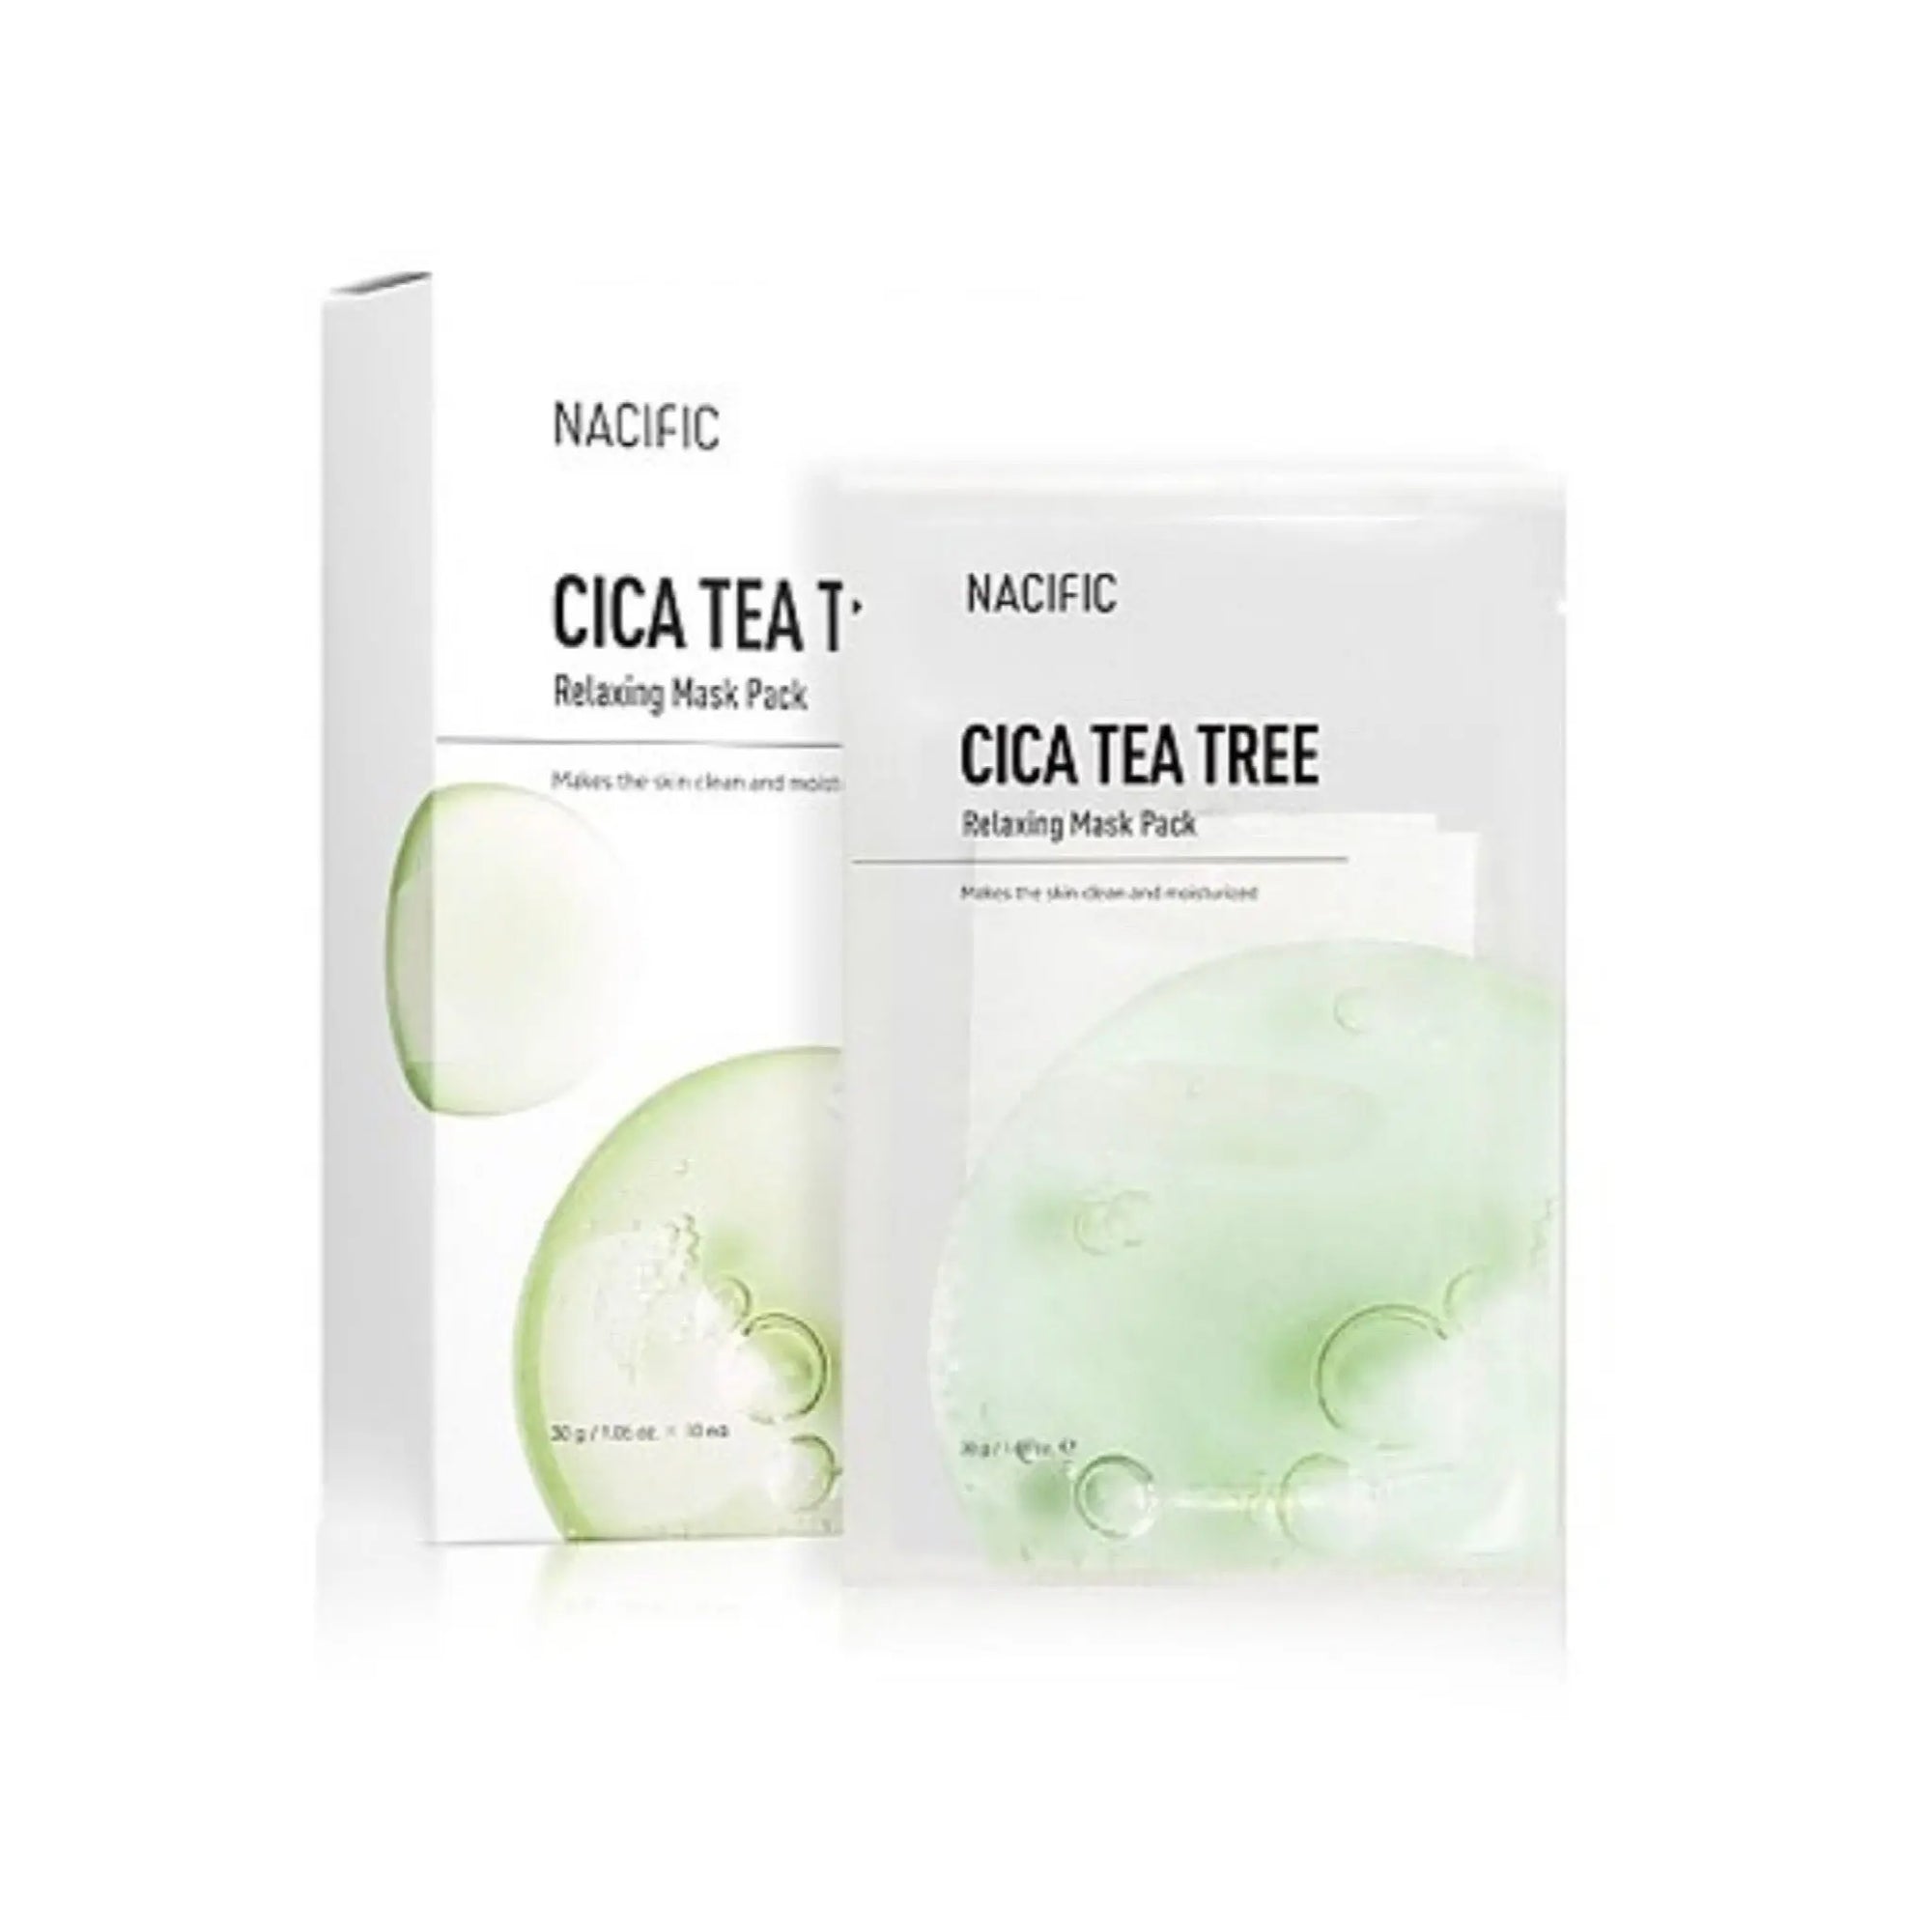 Nacific - Cica Tea Tree Relaxing Mask Pack 30g Nacific